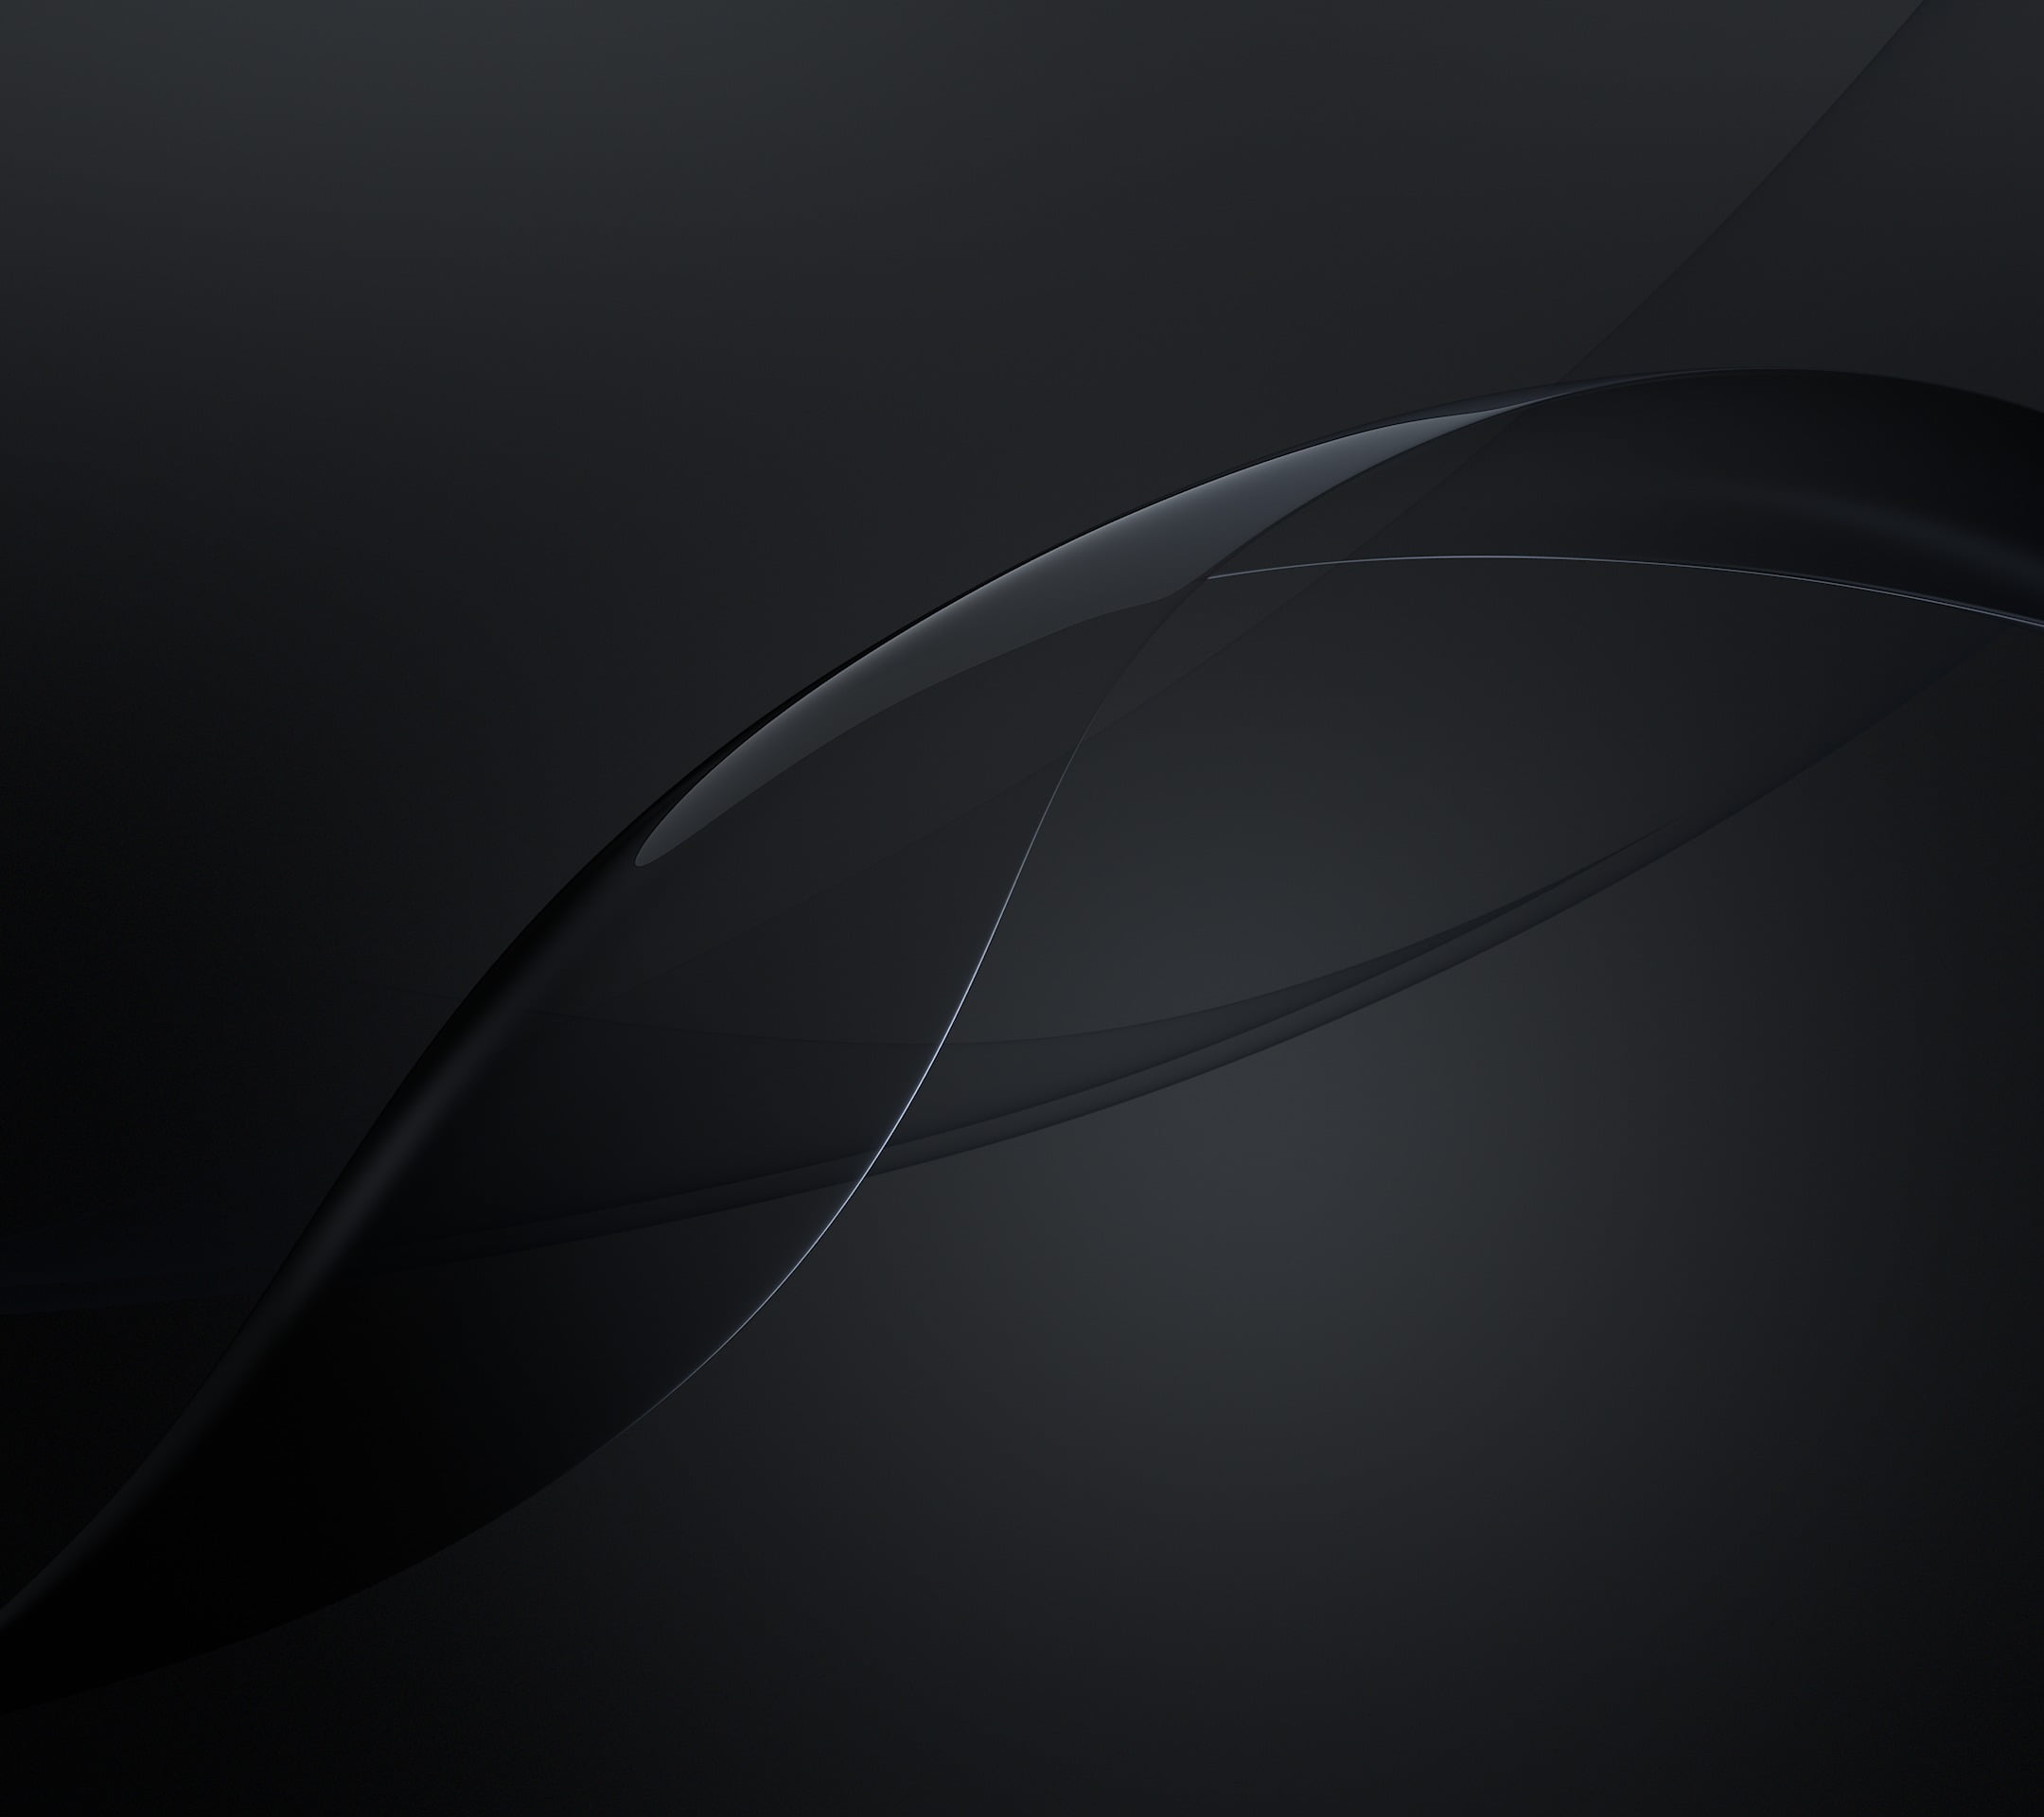 graphic wallpaper, Sony, Black, Stock, Xperia, Experience, abstract